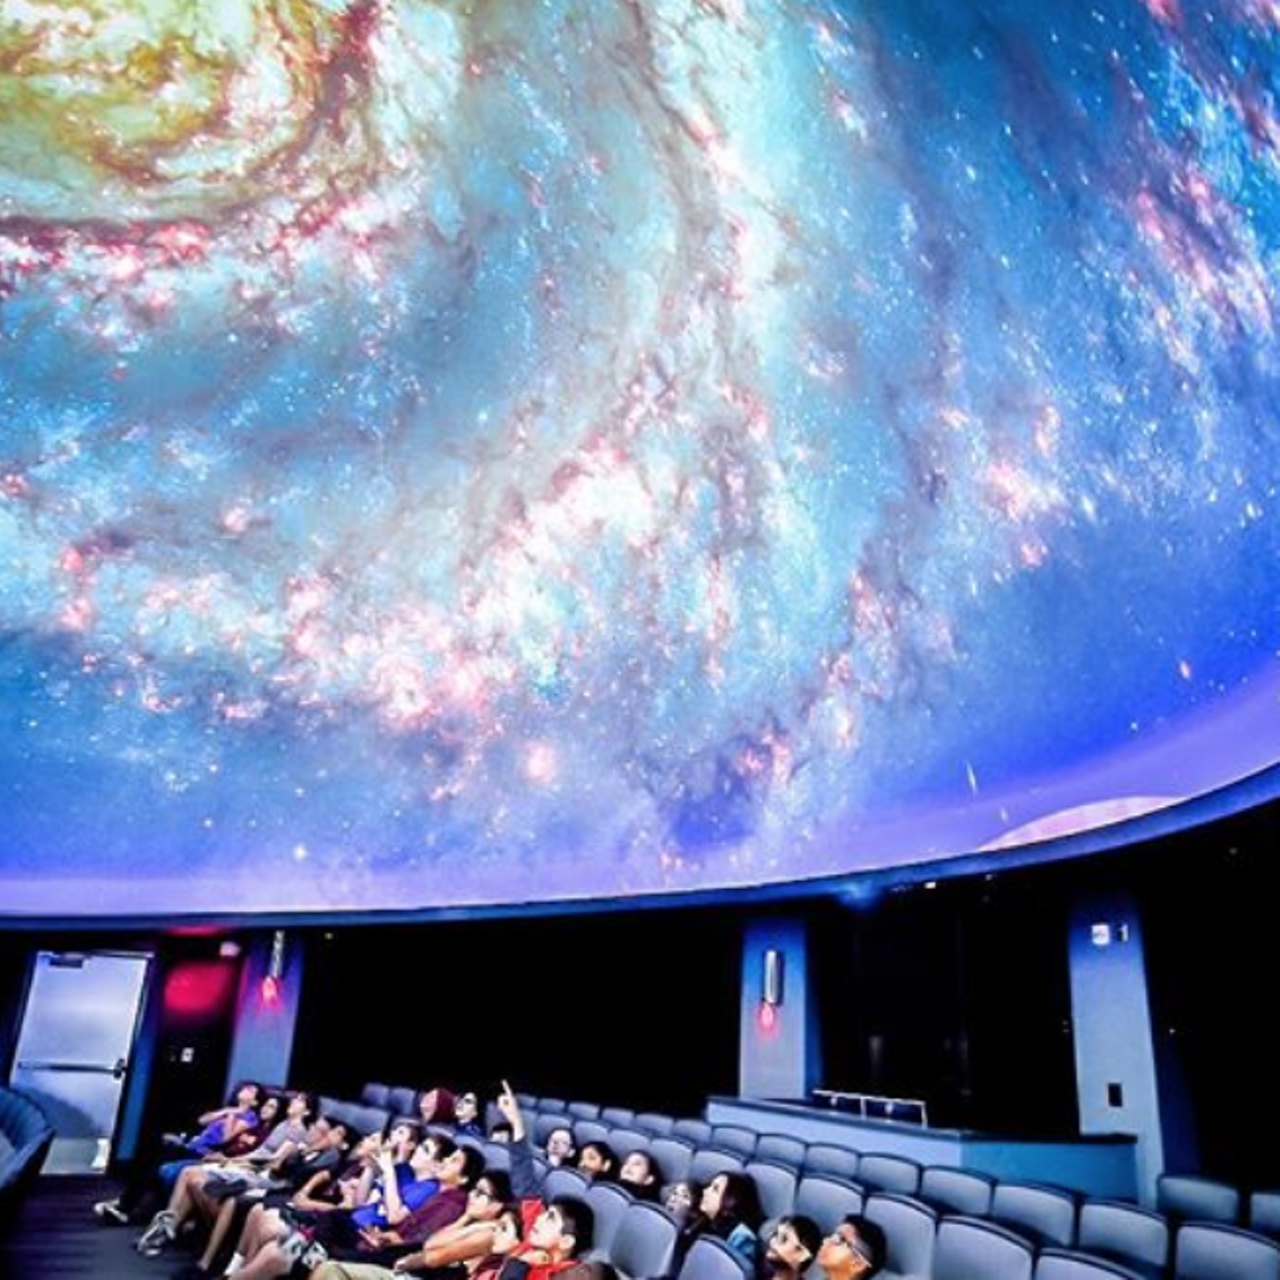 Get out of this world with Scobee Planetarium
1819 N Main Ave, (210) 486-0100, alamo.edu
For an out-of-this world date, take your cutie to the Scobee Planetarium located on SAC’s campus. Open every Friday night for public programming, the planetarium gives you access to various programs throughout the night with jaw-dropping visuals. Whether you and your partner are into nerdy stuff like this or not, y’all will definitely feel as if you’re in your own little world.
Photo via Instagram / sanantoniocollege